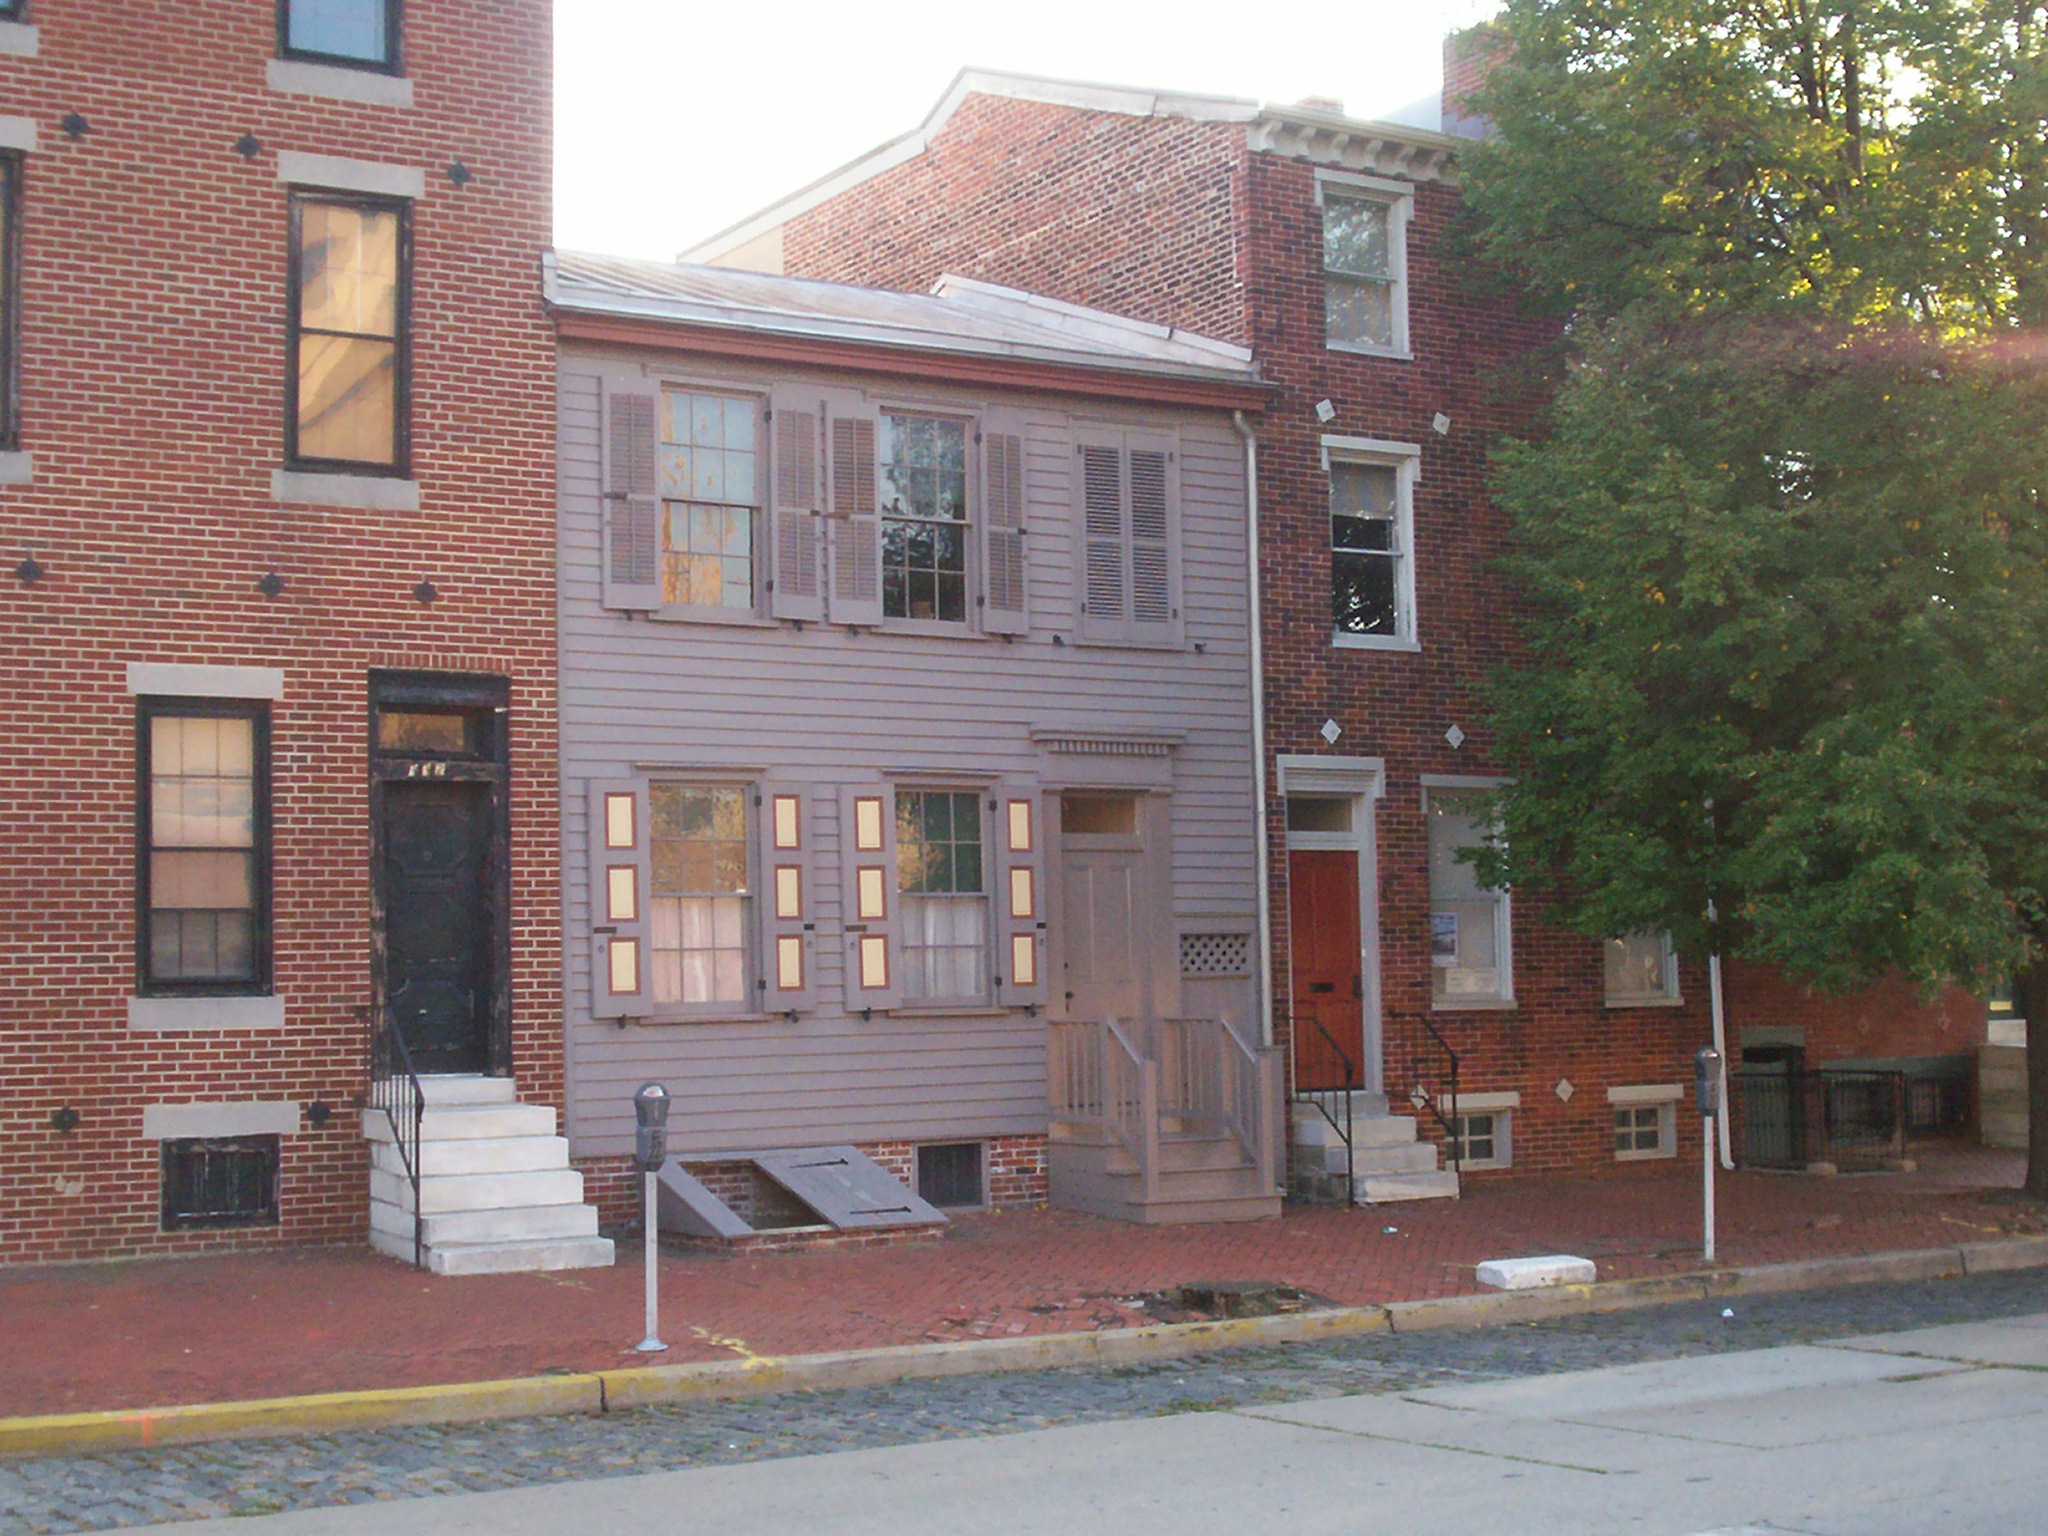 The Whitman House at 330 Mickle Street